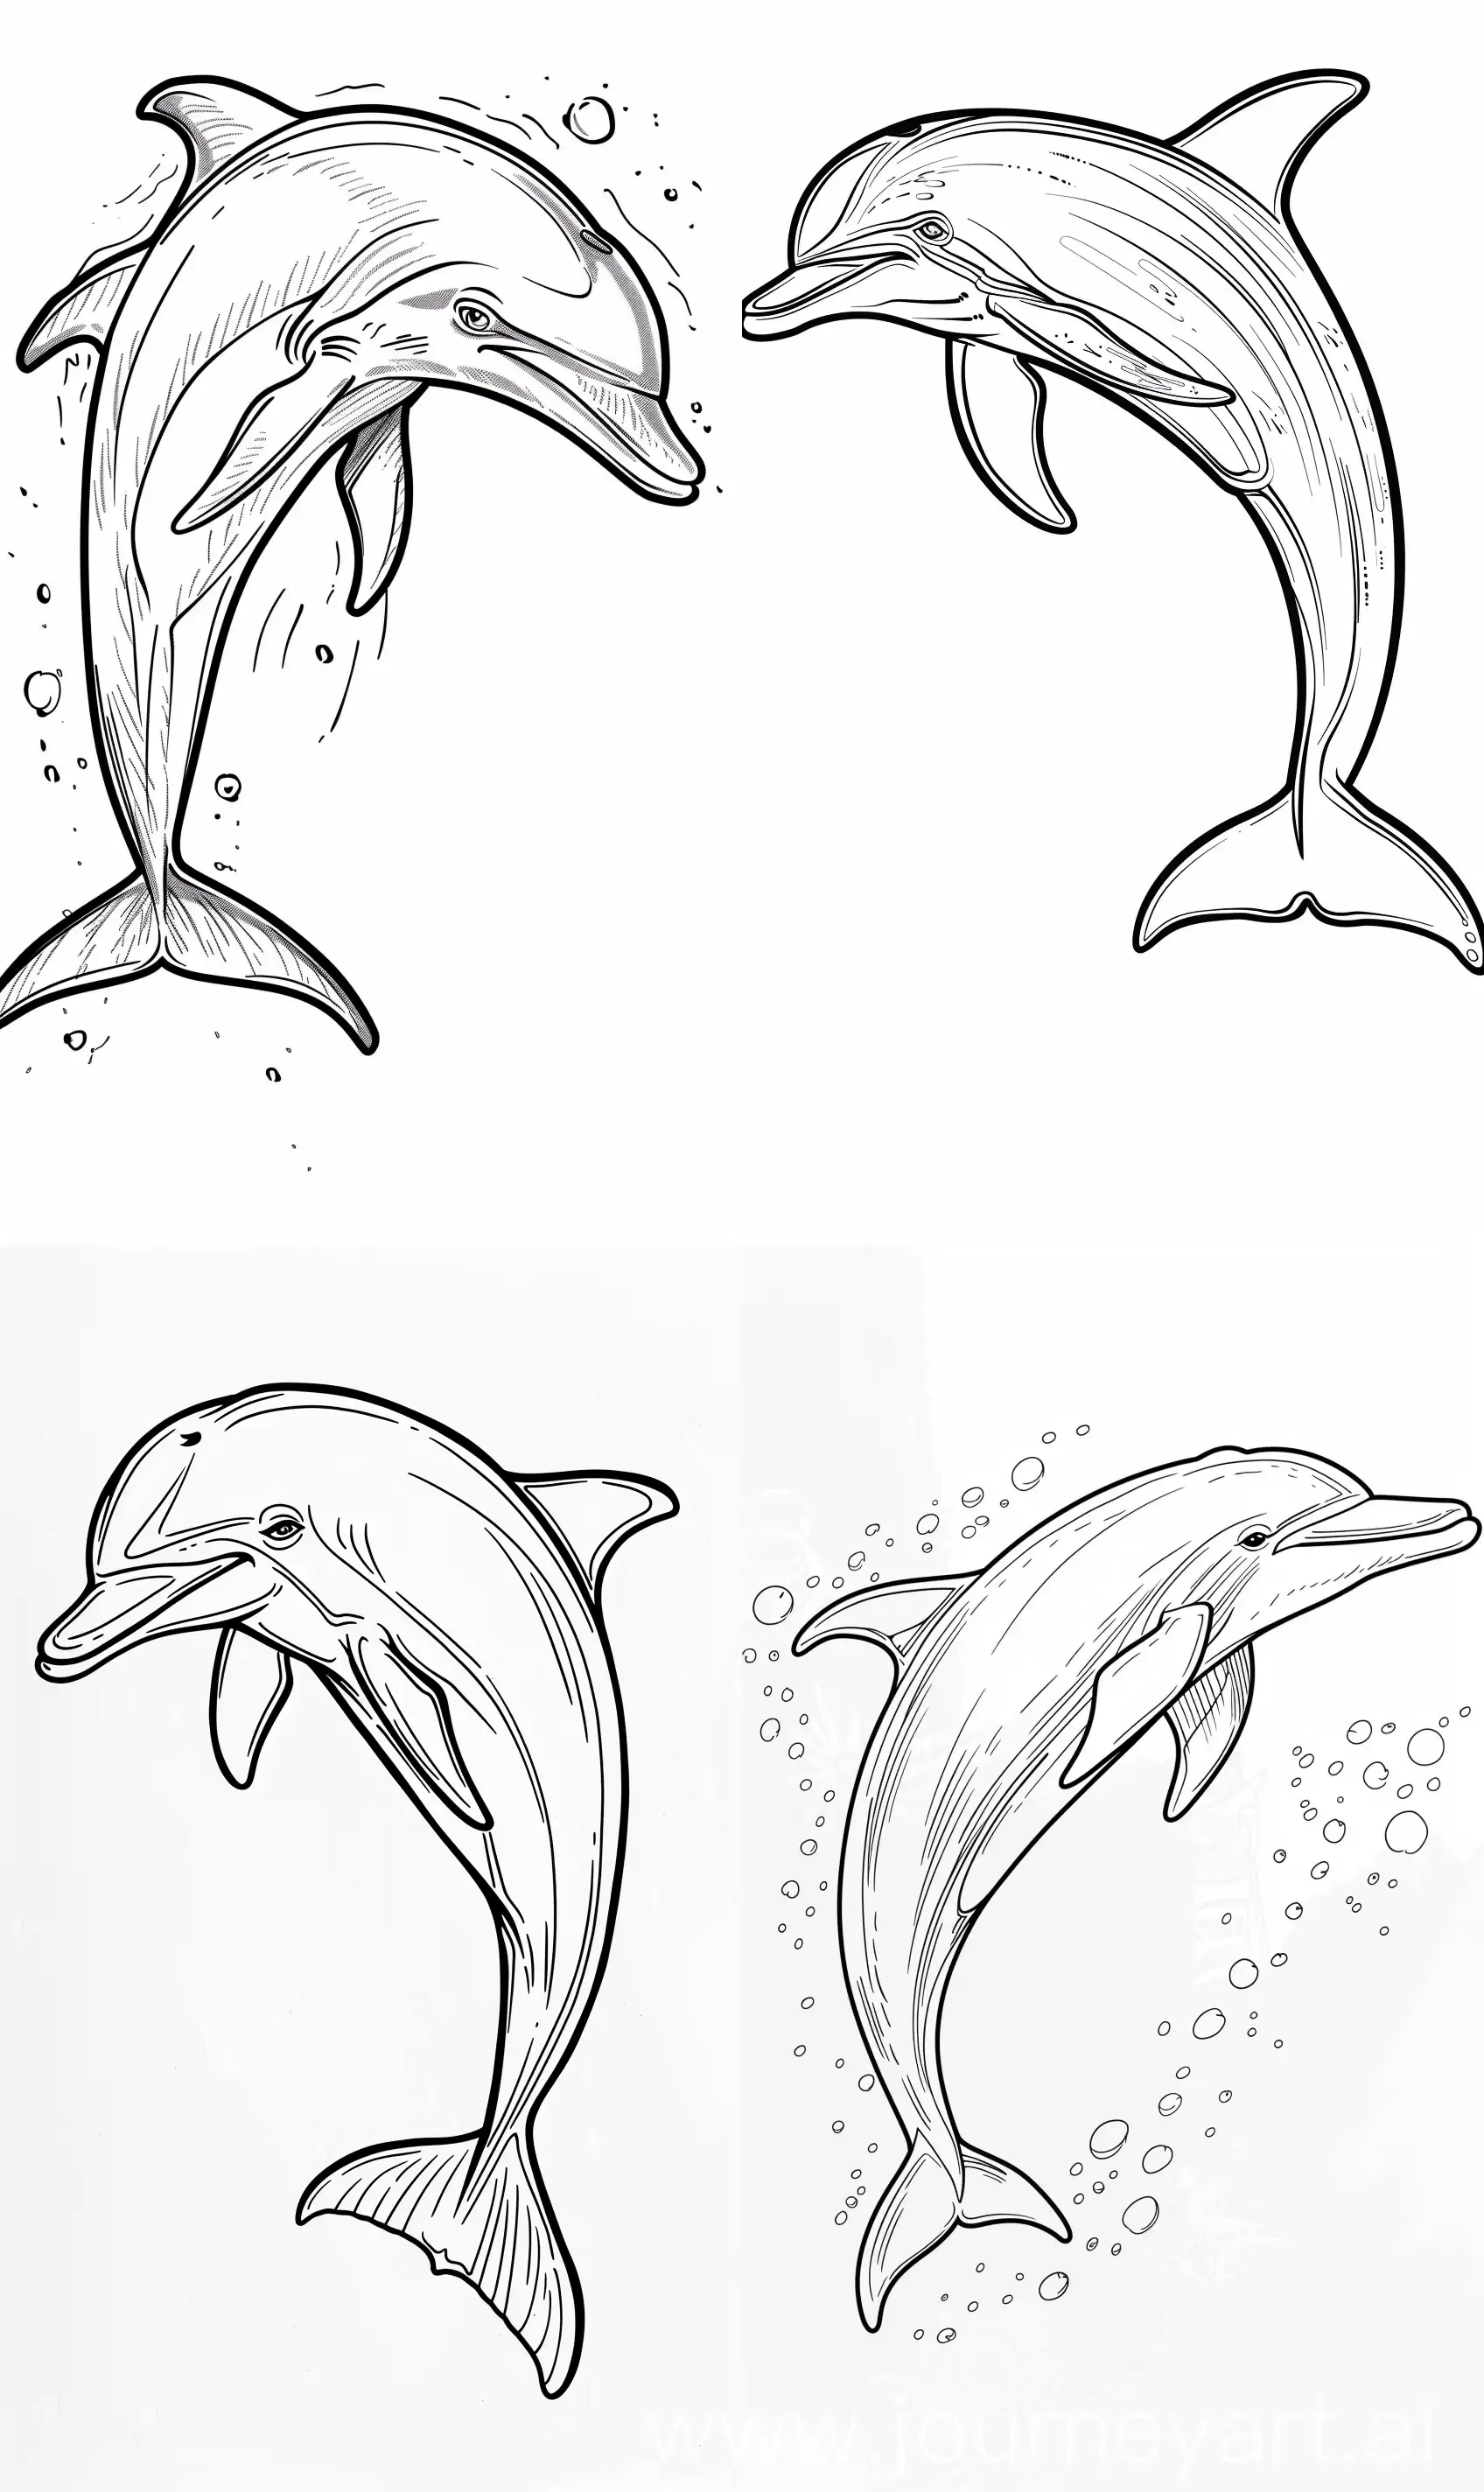 Cartoon dolphin black and white coloring page for coloring book --v 6.0 --ar 3:5